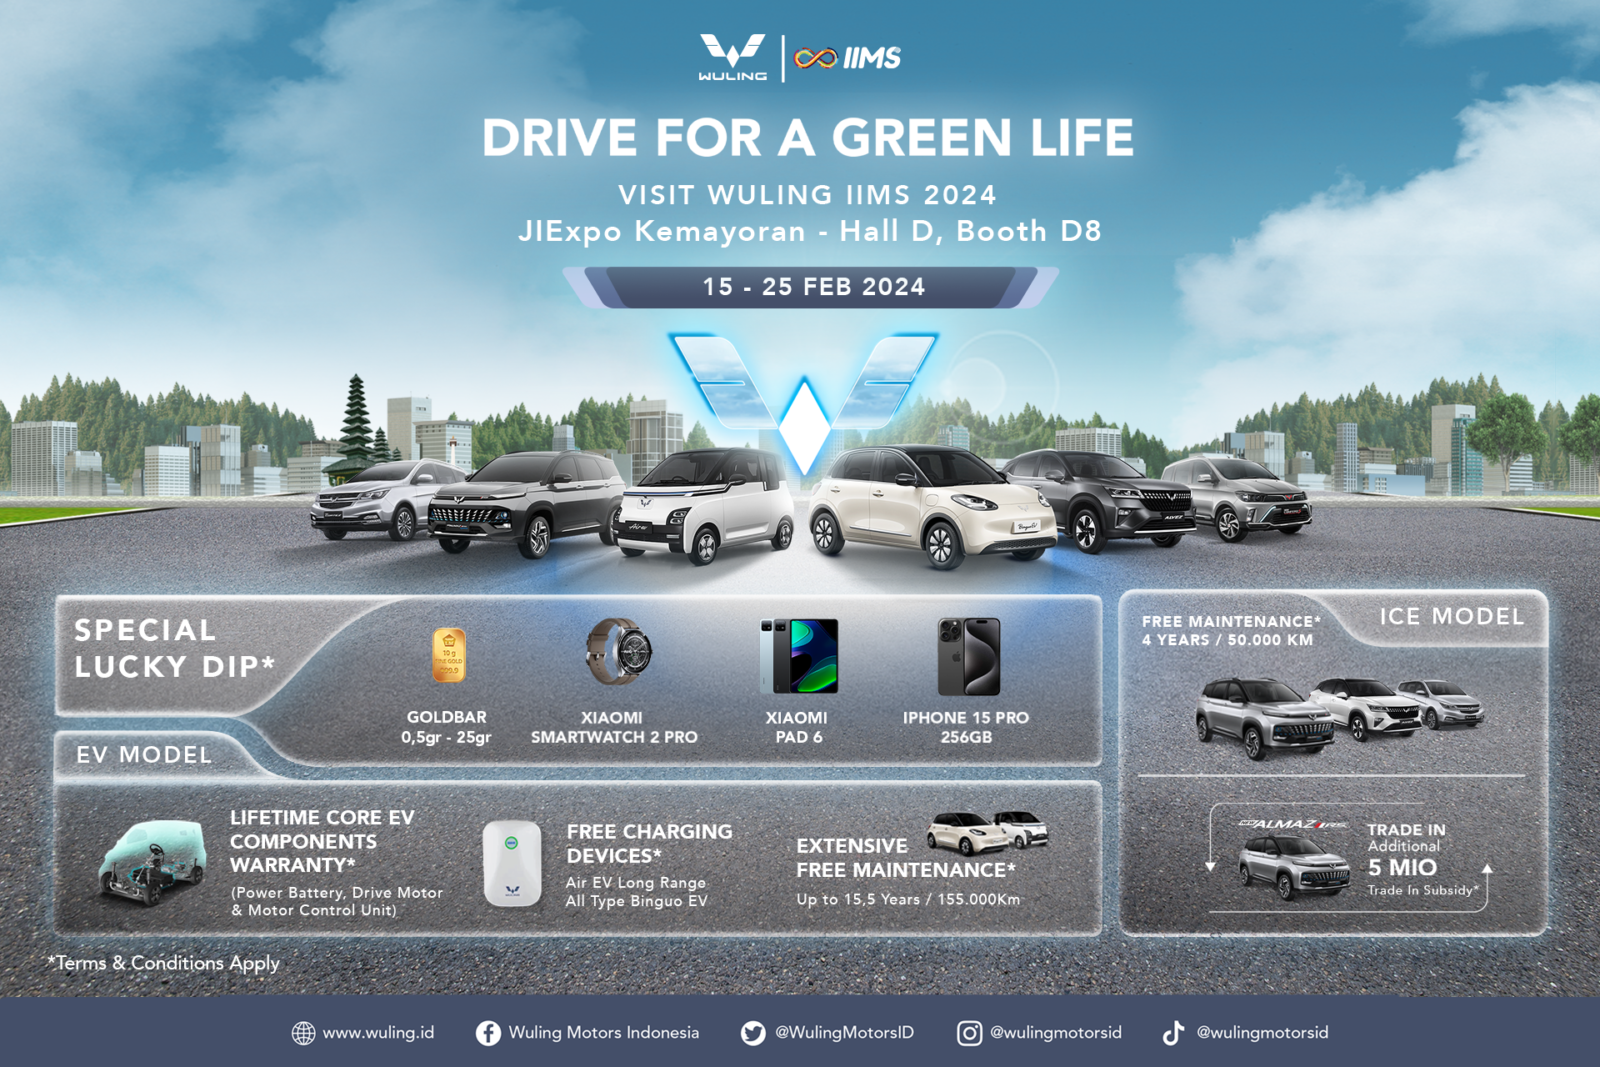 Image Wuling Brings the Spirit of ‘Drive For A Green Life’ Through Product Lines and Promos at IIMS 2024